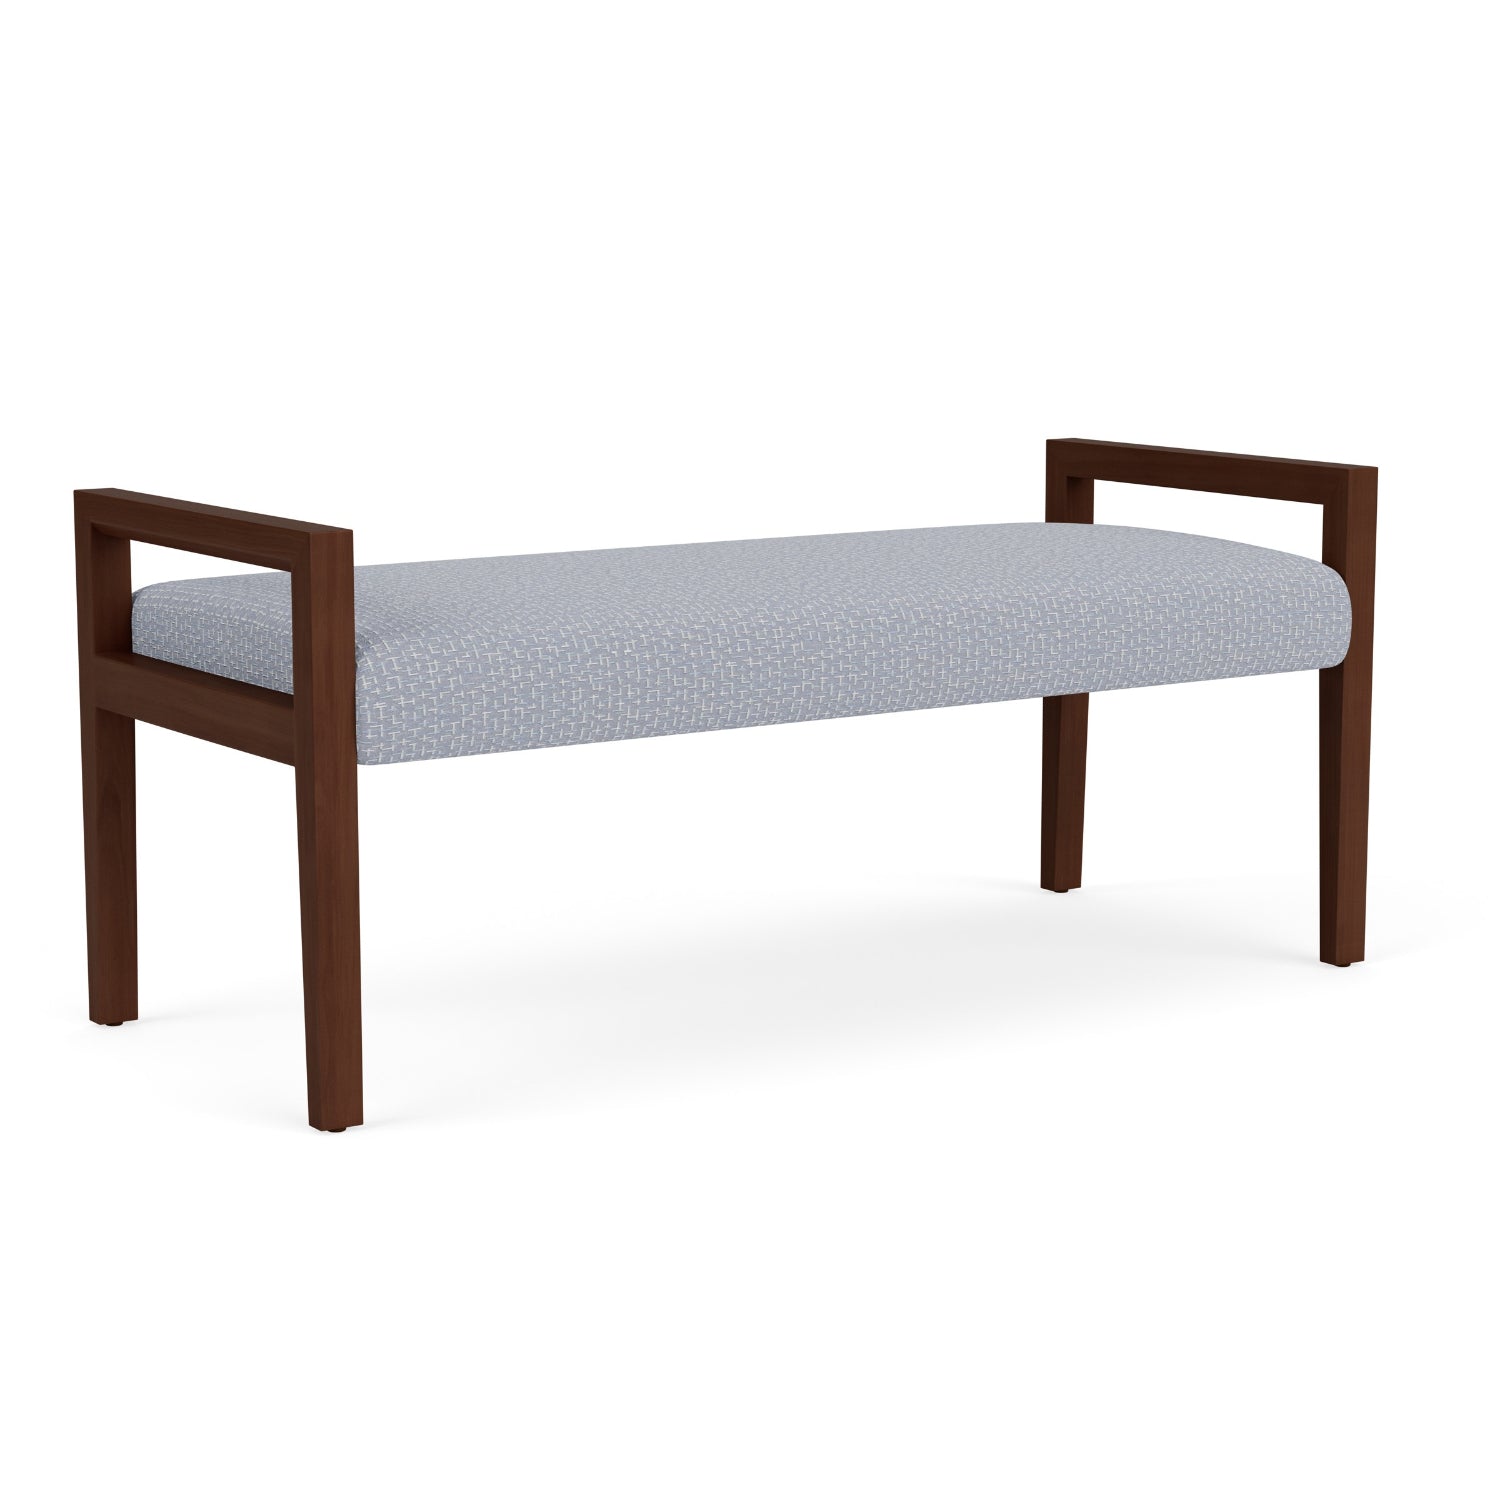 Brooklyn Collection Reception Seating, 2 Seat Bench, Designer Fabric Upholstery, FREE SHIPPING